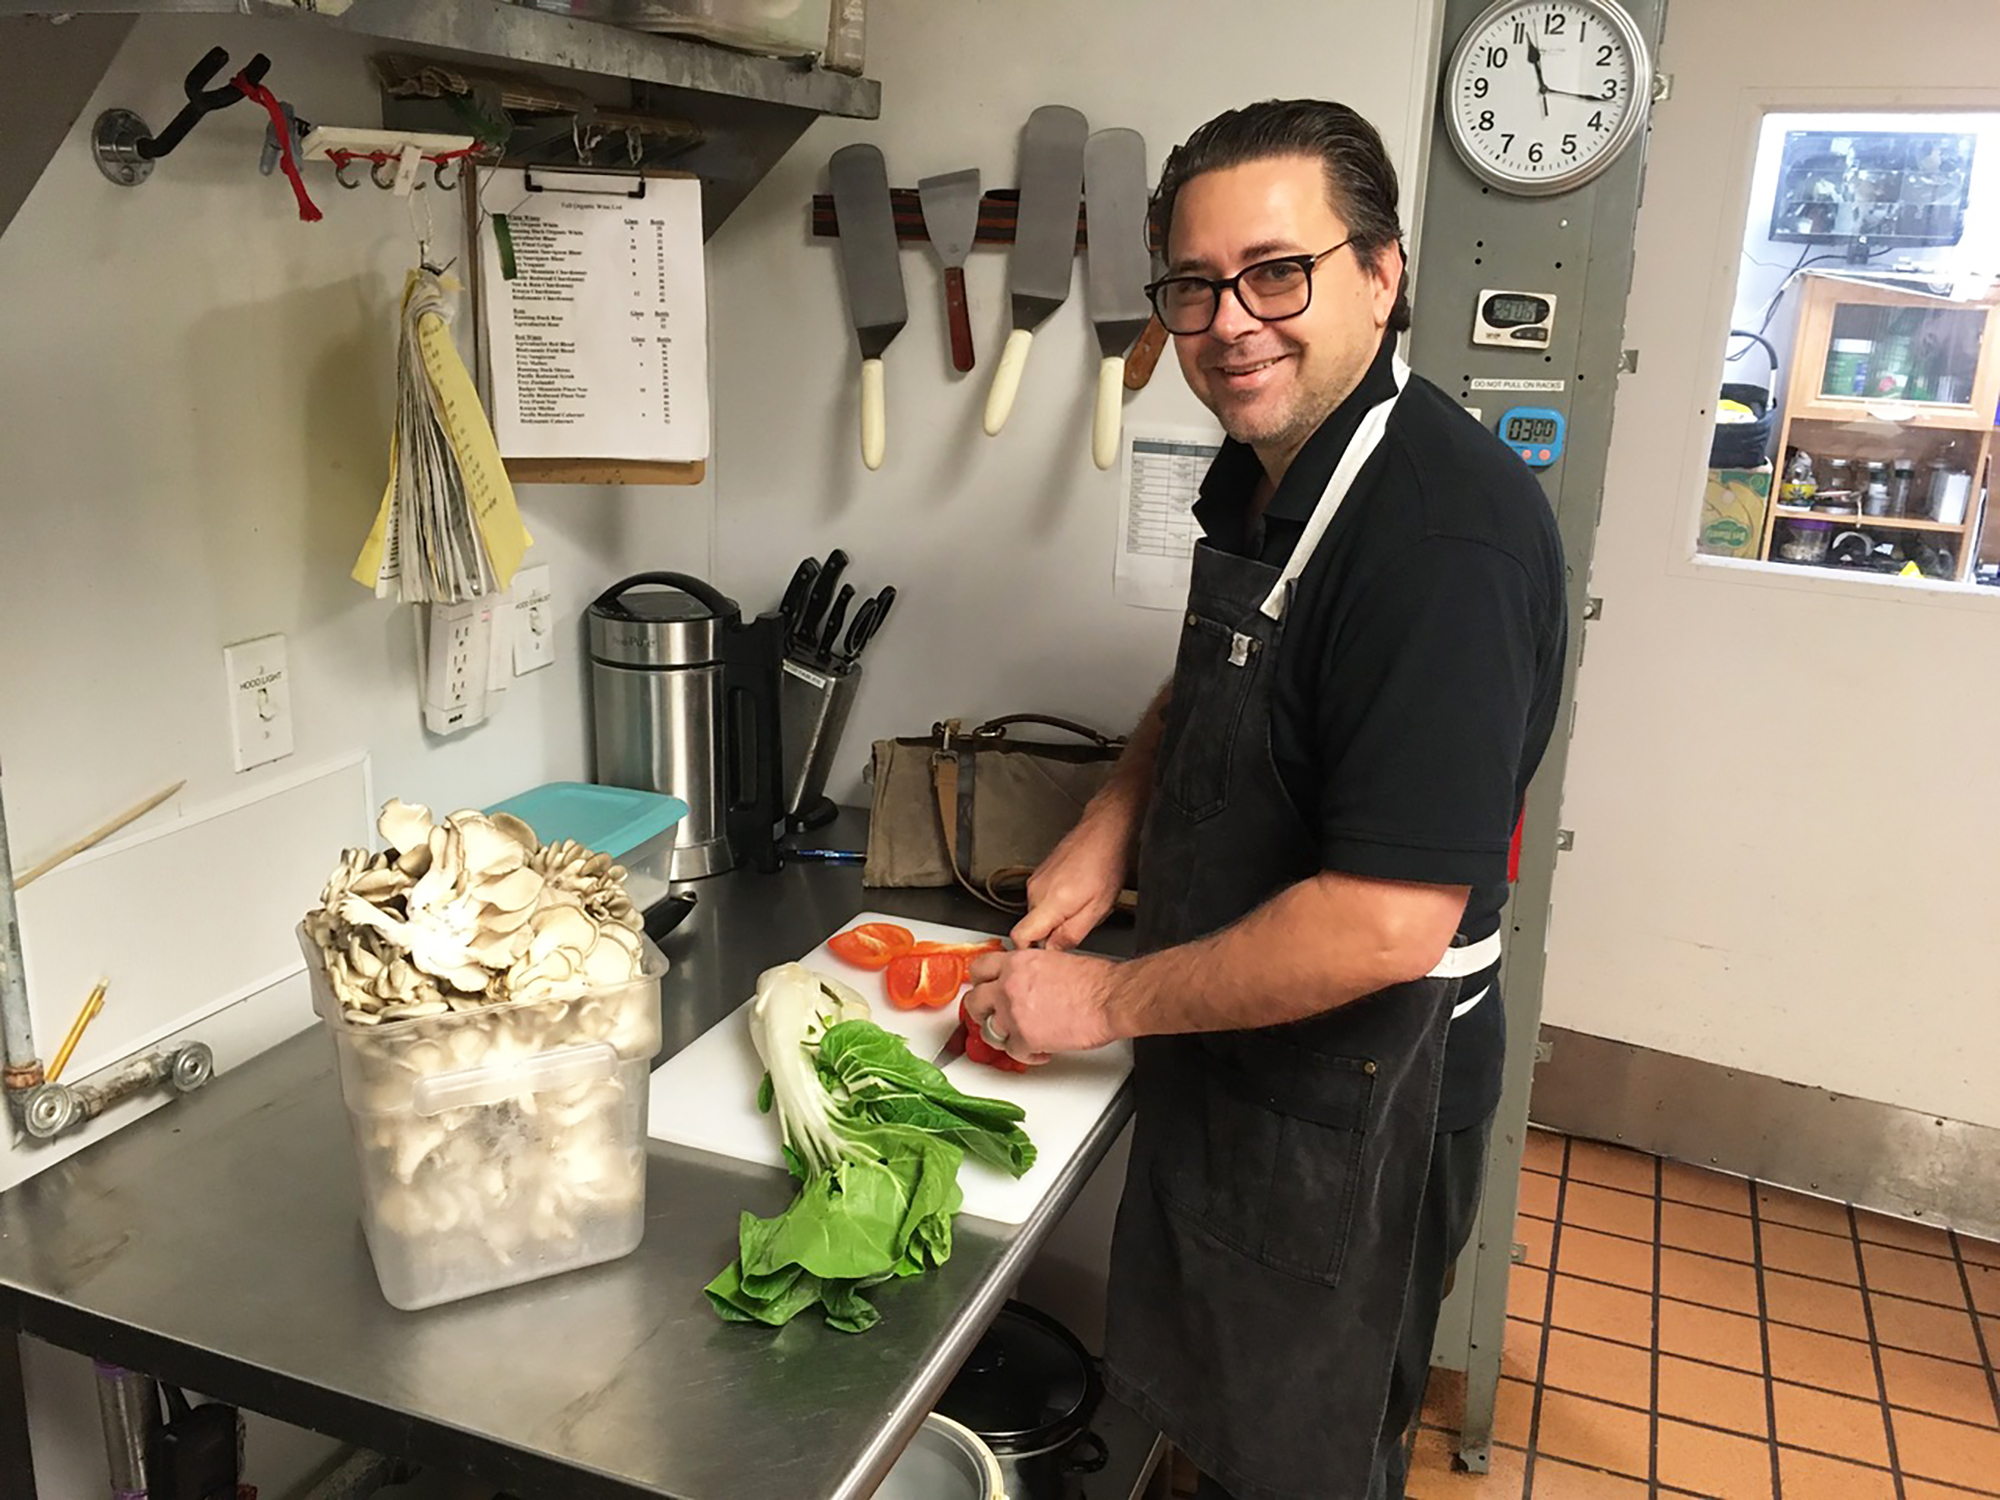 Marshall Ziehm is a classically trained chef who has been in the culinary world for 36 years. He previously worked at Coop 303 in Atlantic Beach.